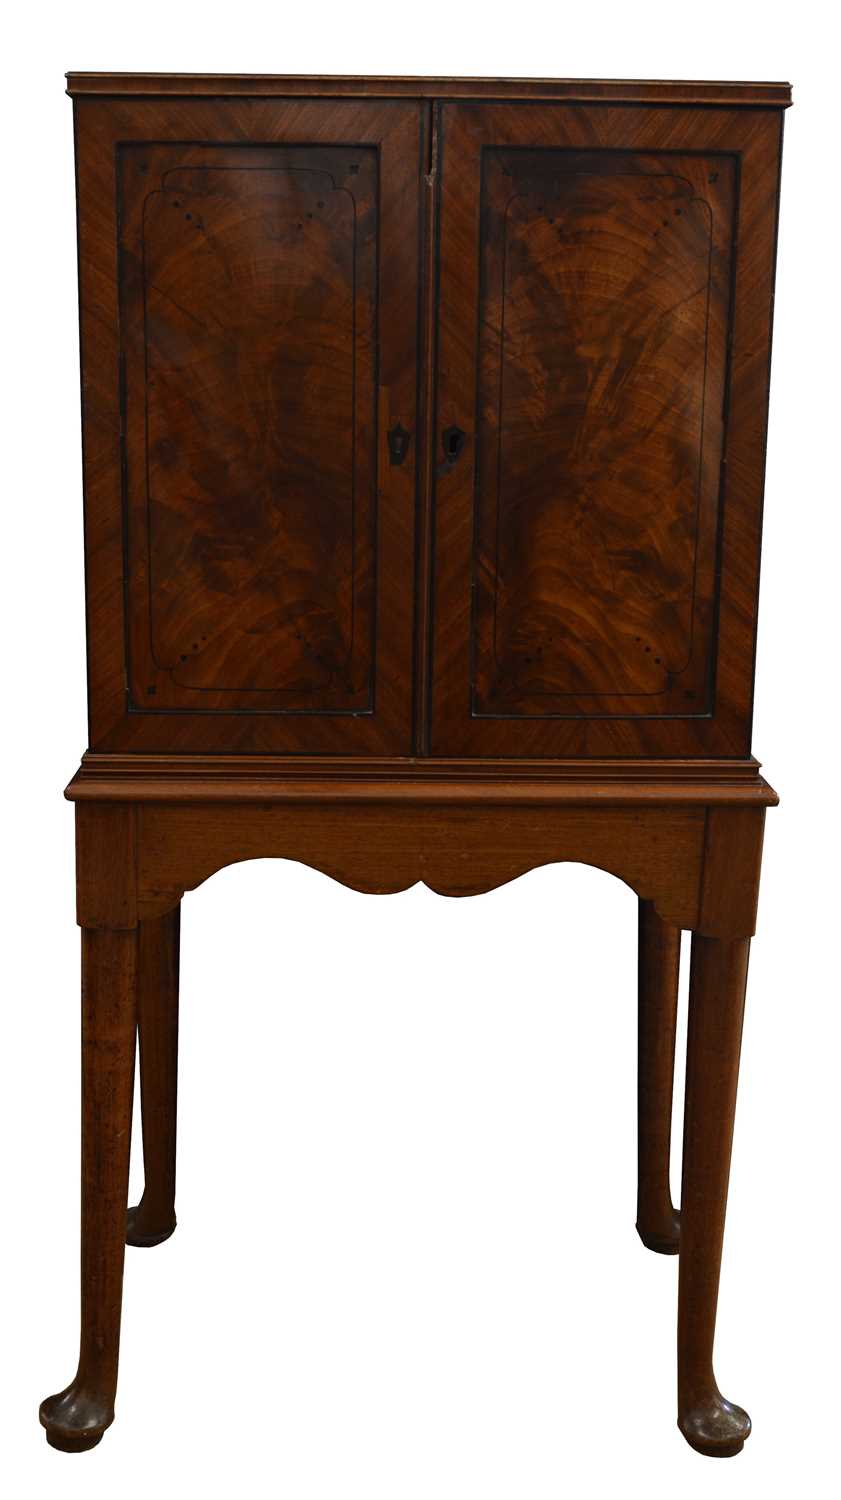 Lot 229 - Mid-19th century collectors cabinet on stand